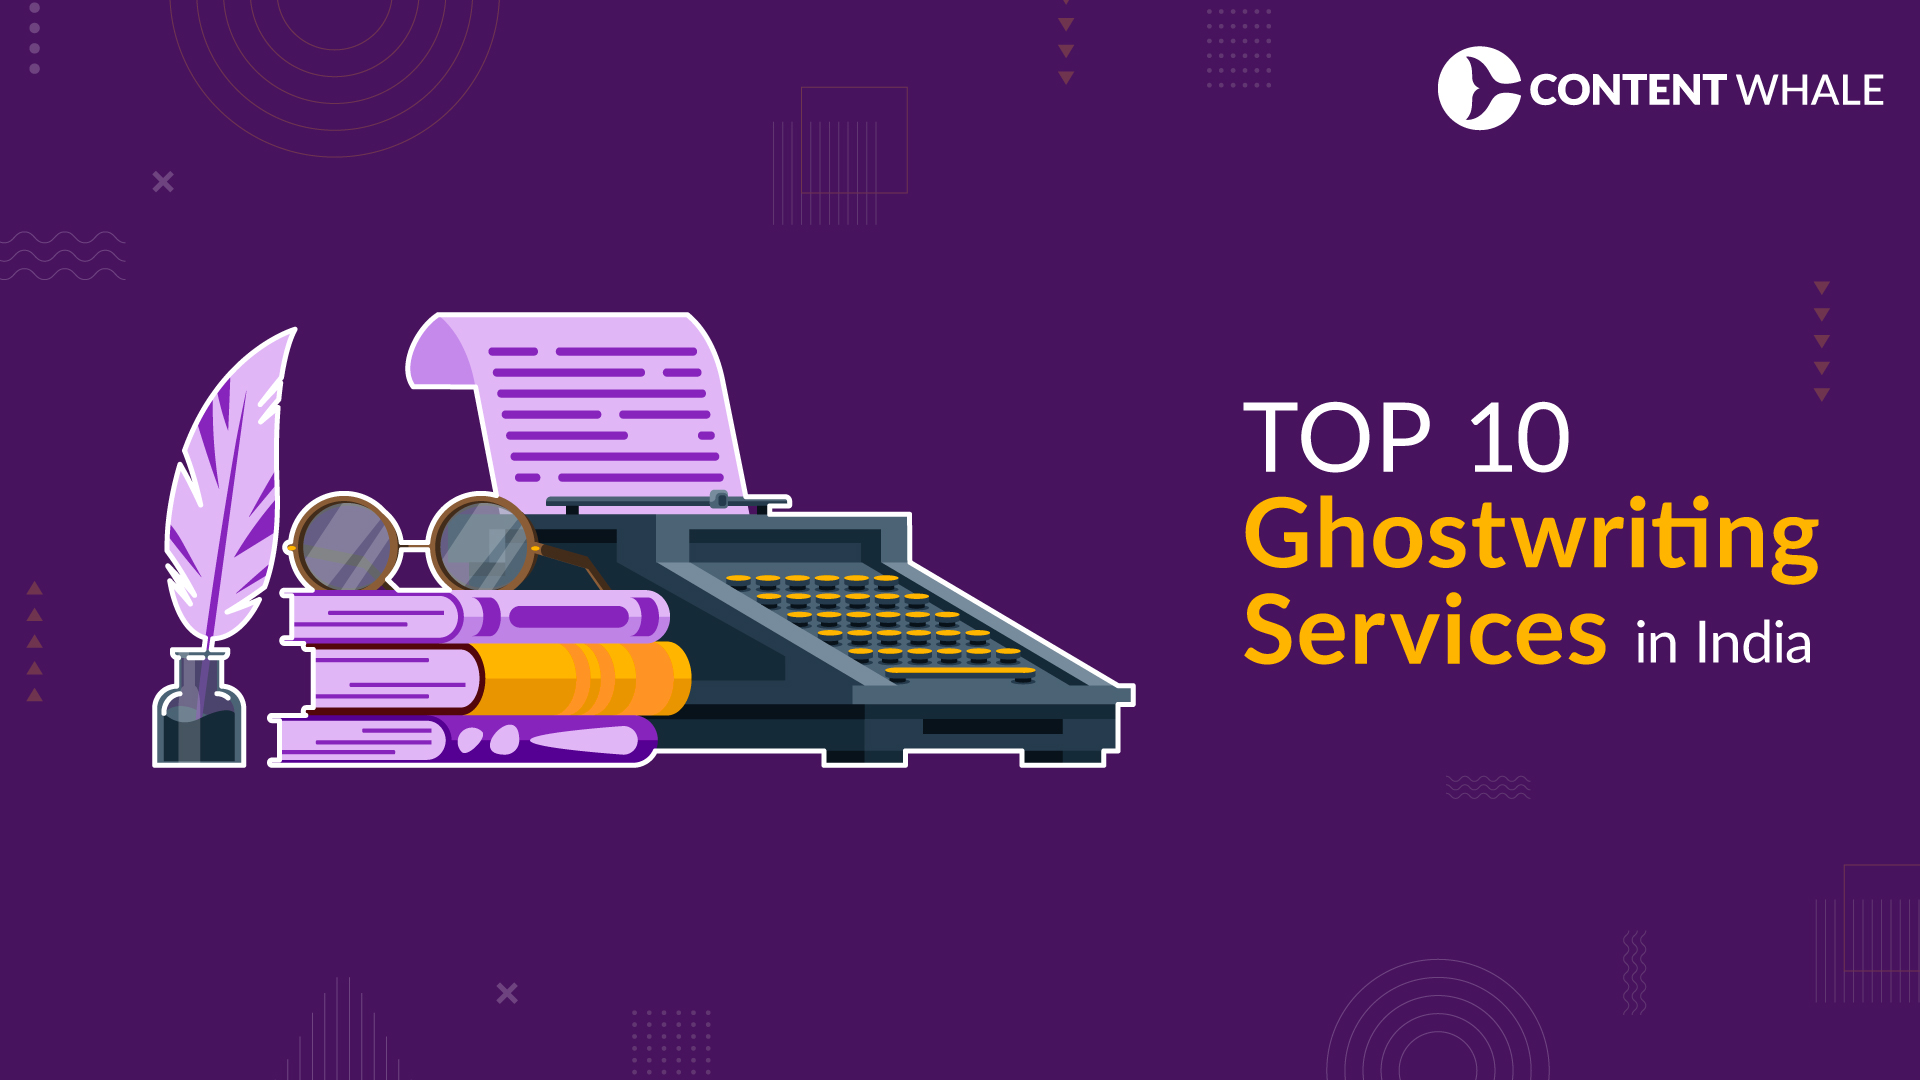 Banner Image with text Top 10 Ghostwriting Services in India